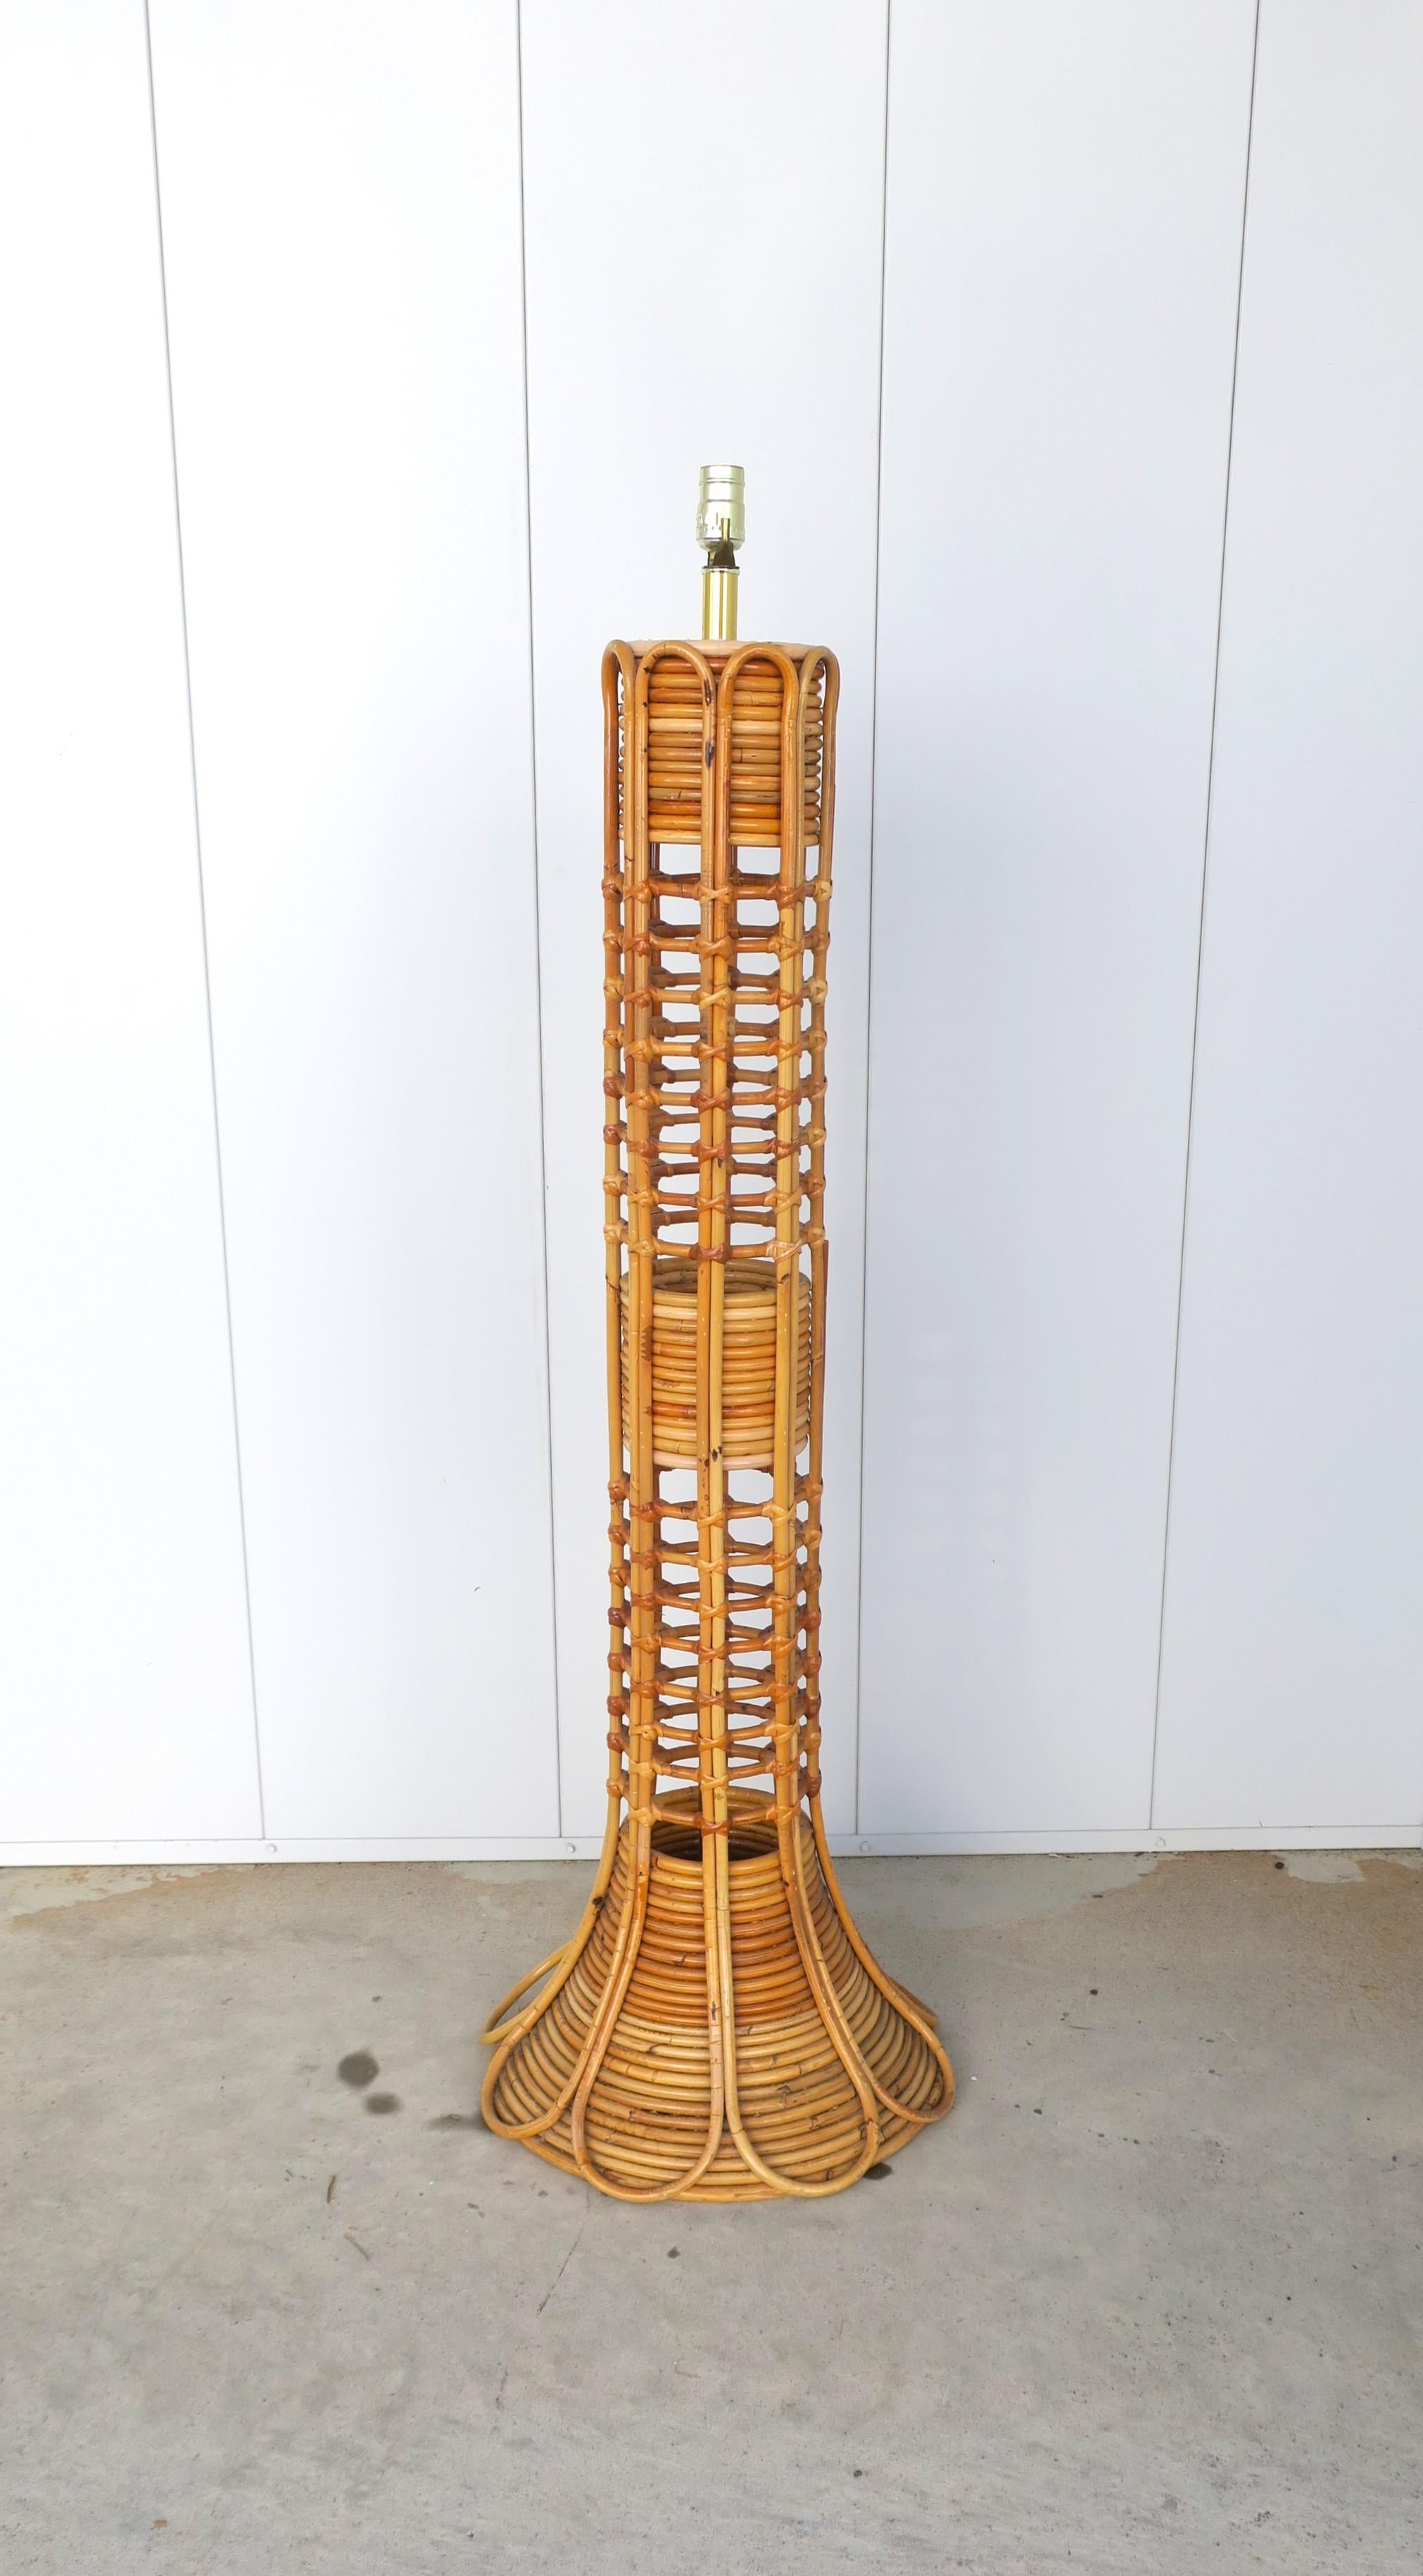 A wicker floor lamp in the style of Italian designers Gabriella Crespi and Franco Albini, circa mid to late-20th century. Harp included, just not shown in images. Lamps shade shown for photo-op only (a wider drum shade would probably look/work